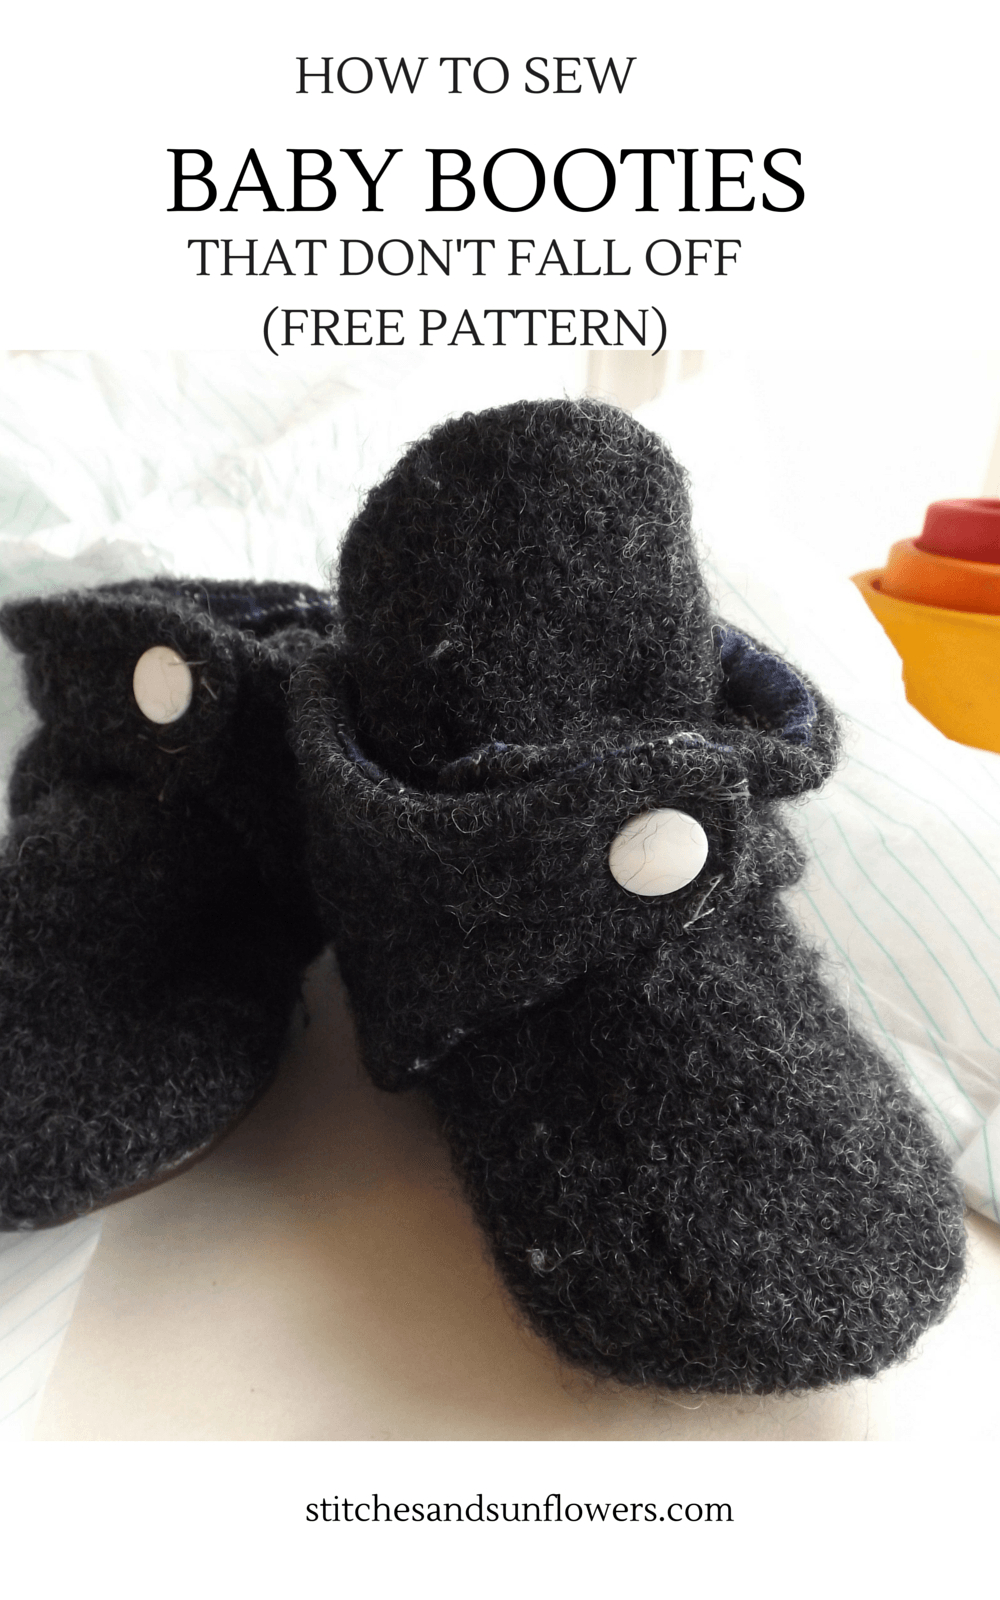 Baby Booties Sewing Pattern How To Sew Ba Booties That Dont Fall Off Free Pattern